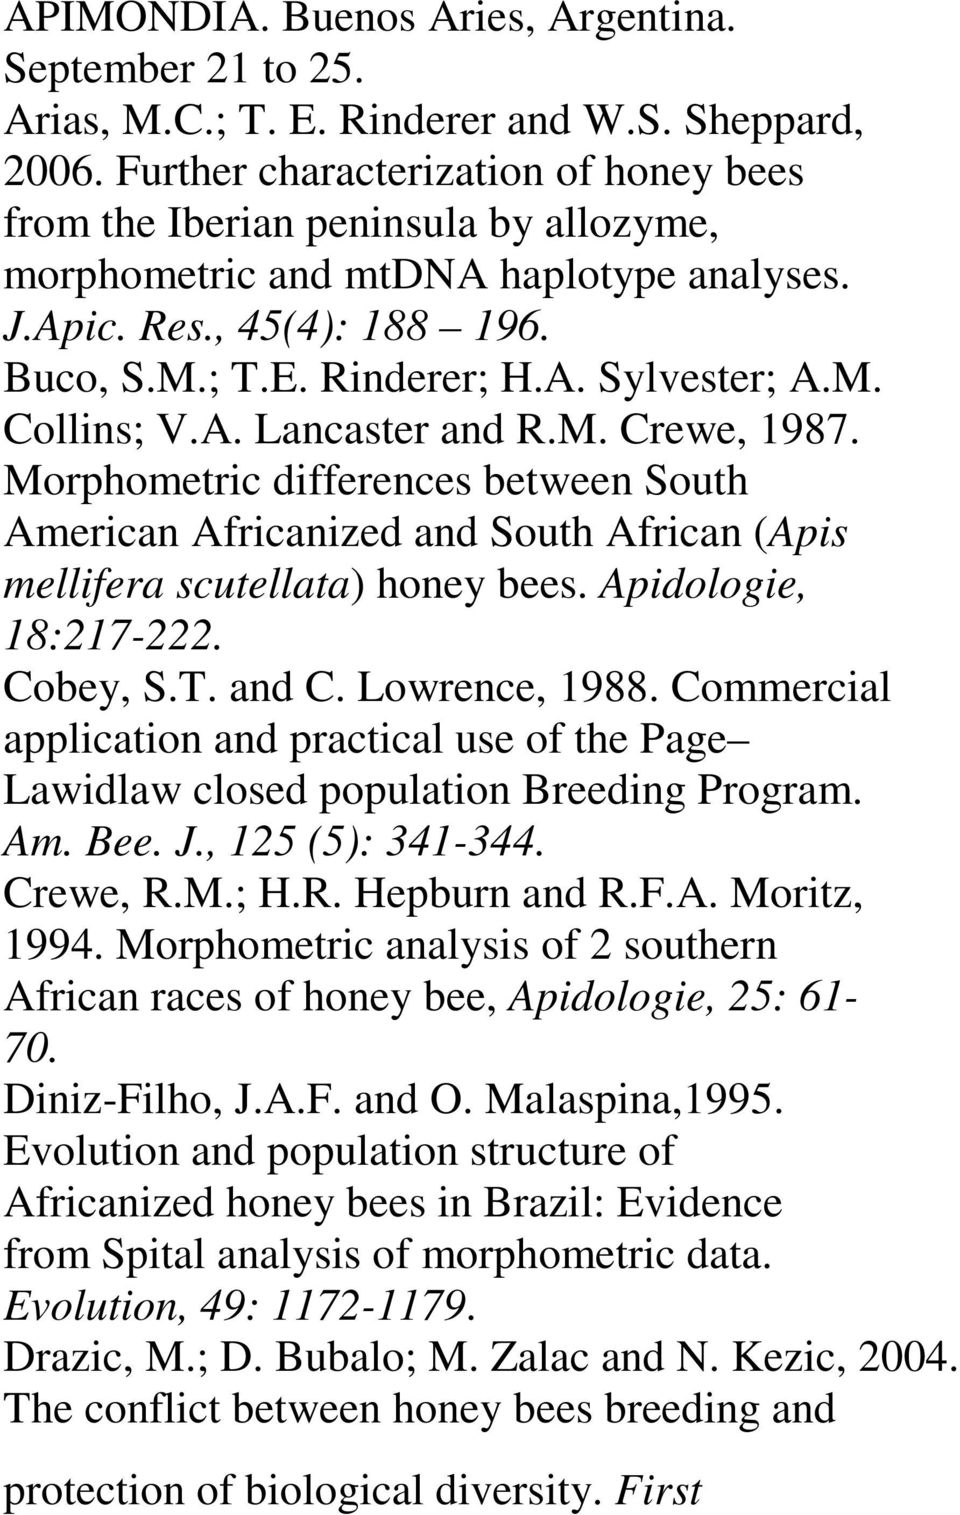 A. Lancaster and R.M. Crewe, 1987. Morphometric differences between South American Africanized and South African (Apis mellifera scutellata) honey bees. Apidologie, 18:217-222. Cobey, S.T. and C.